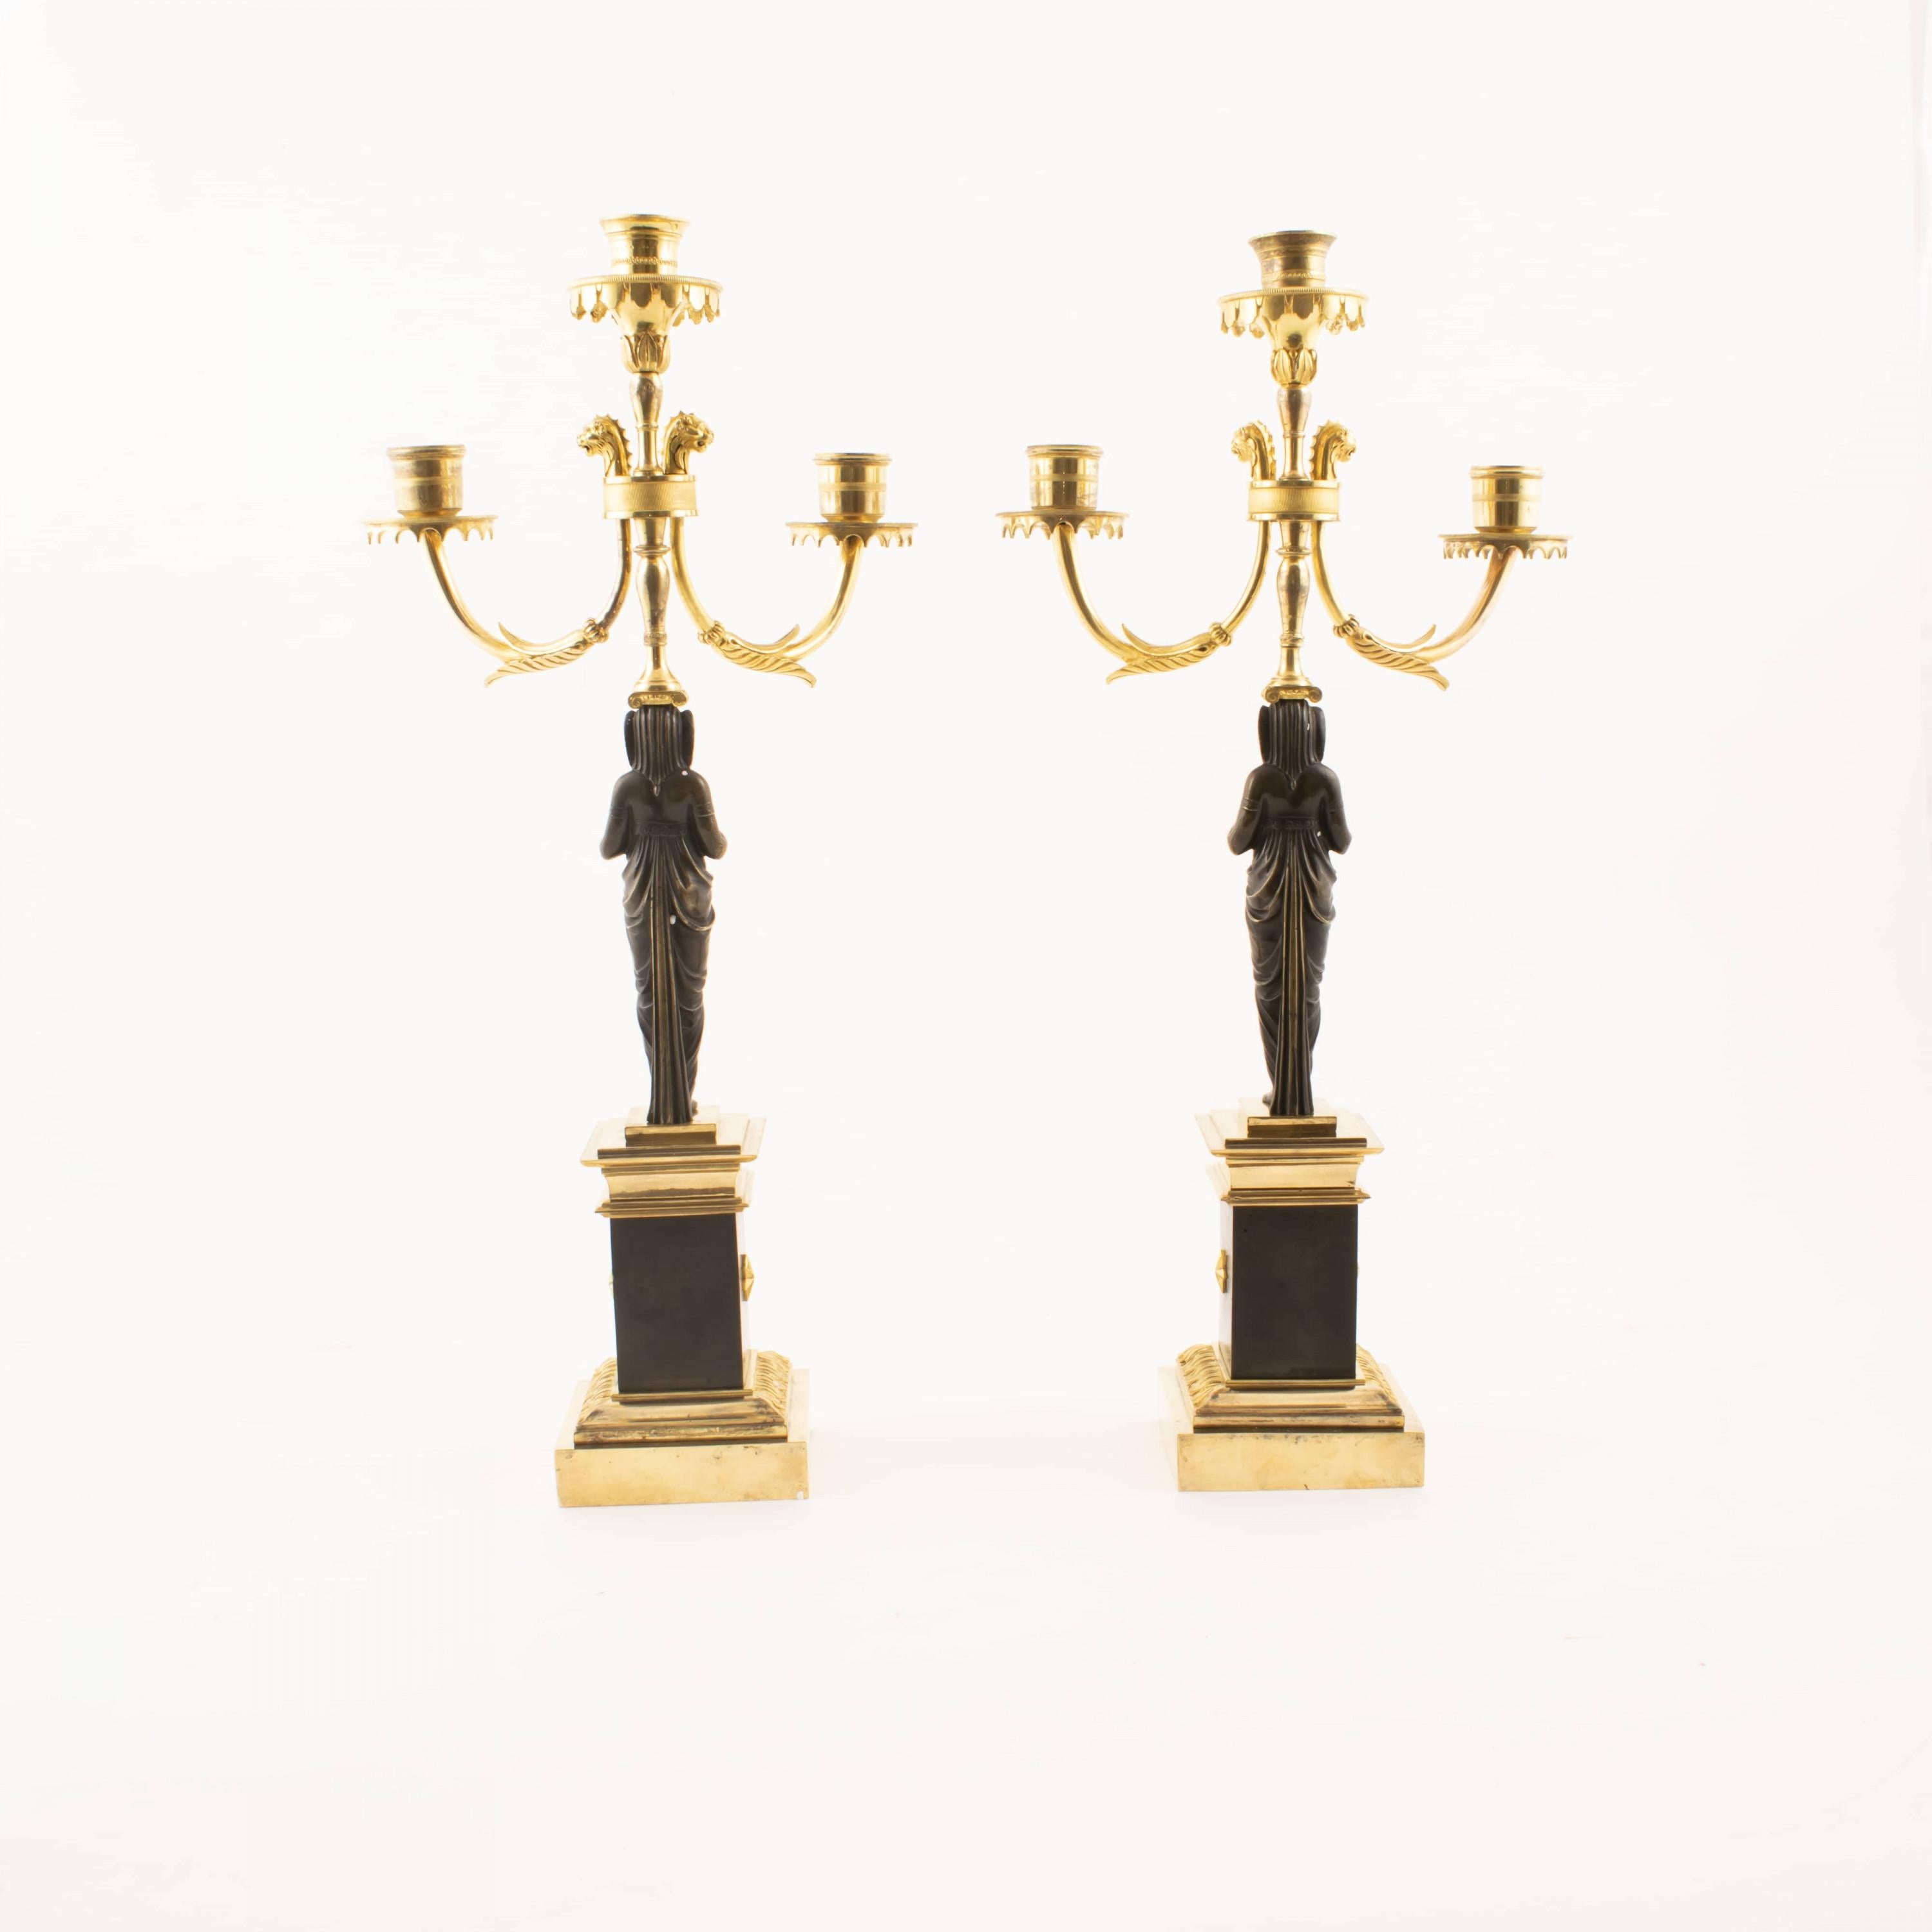 A pair of Empire candelabra in gilded and dark patinated bronze.
3 Light arms, stem in the form of women in light clothing.
Light pipes with chisels.
Two light stems with foliage at the top with lion's heads below cuffs, wavy border.
Originally used